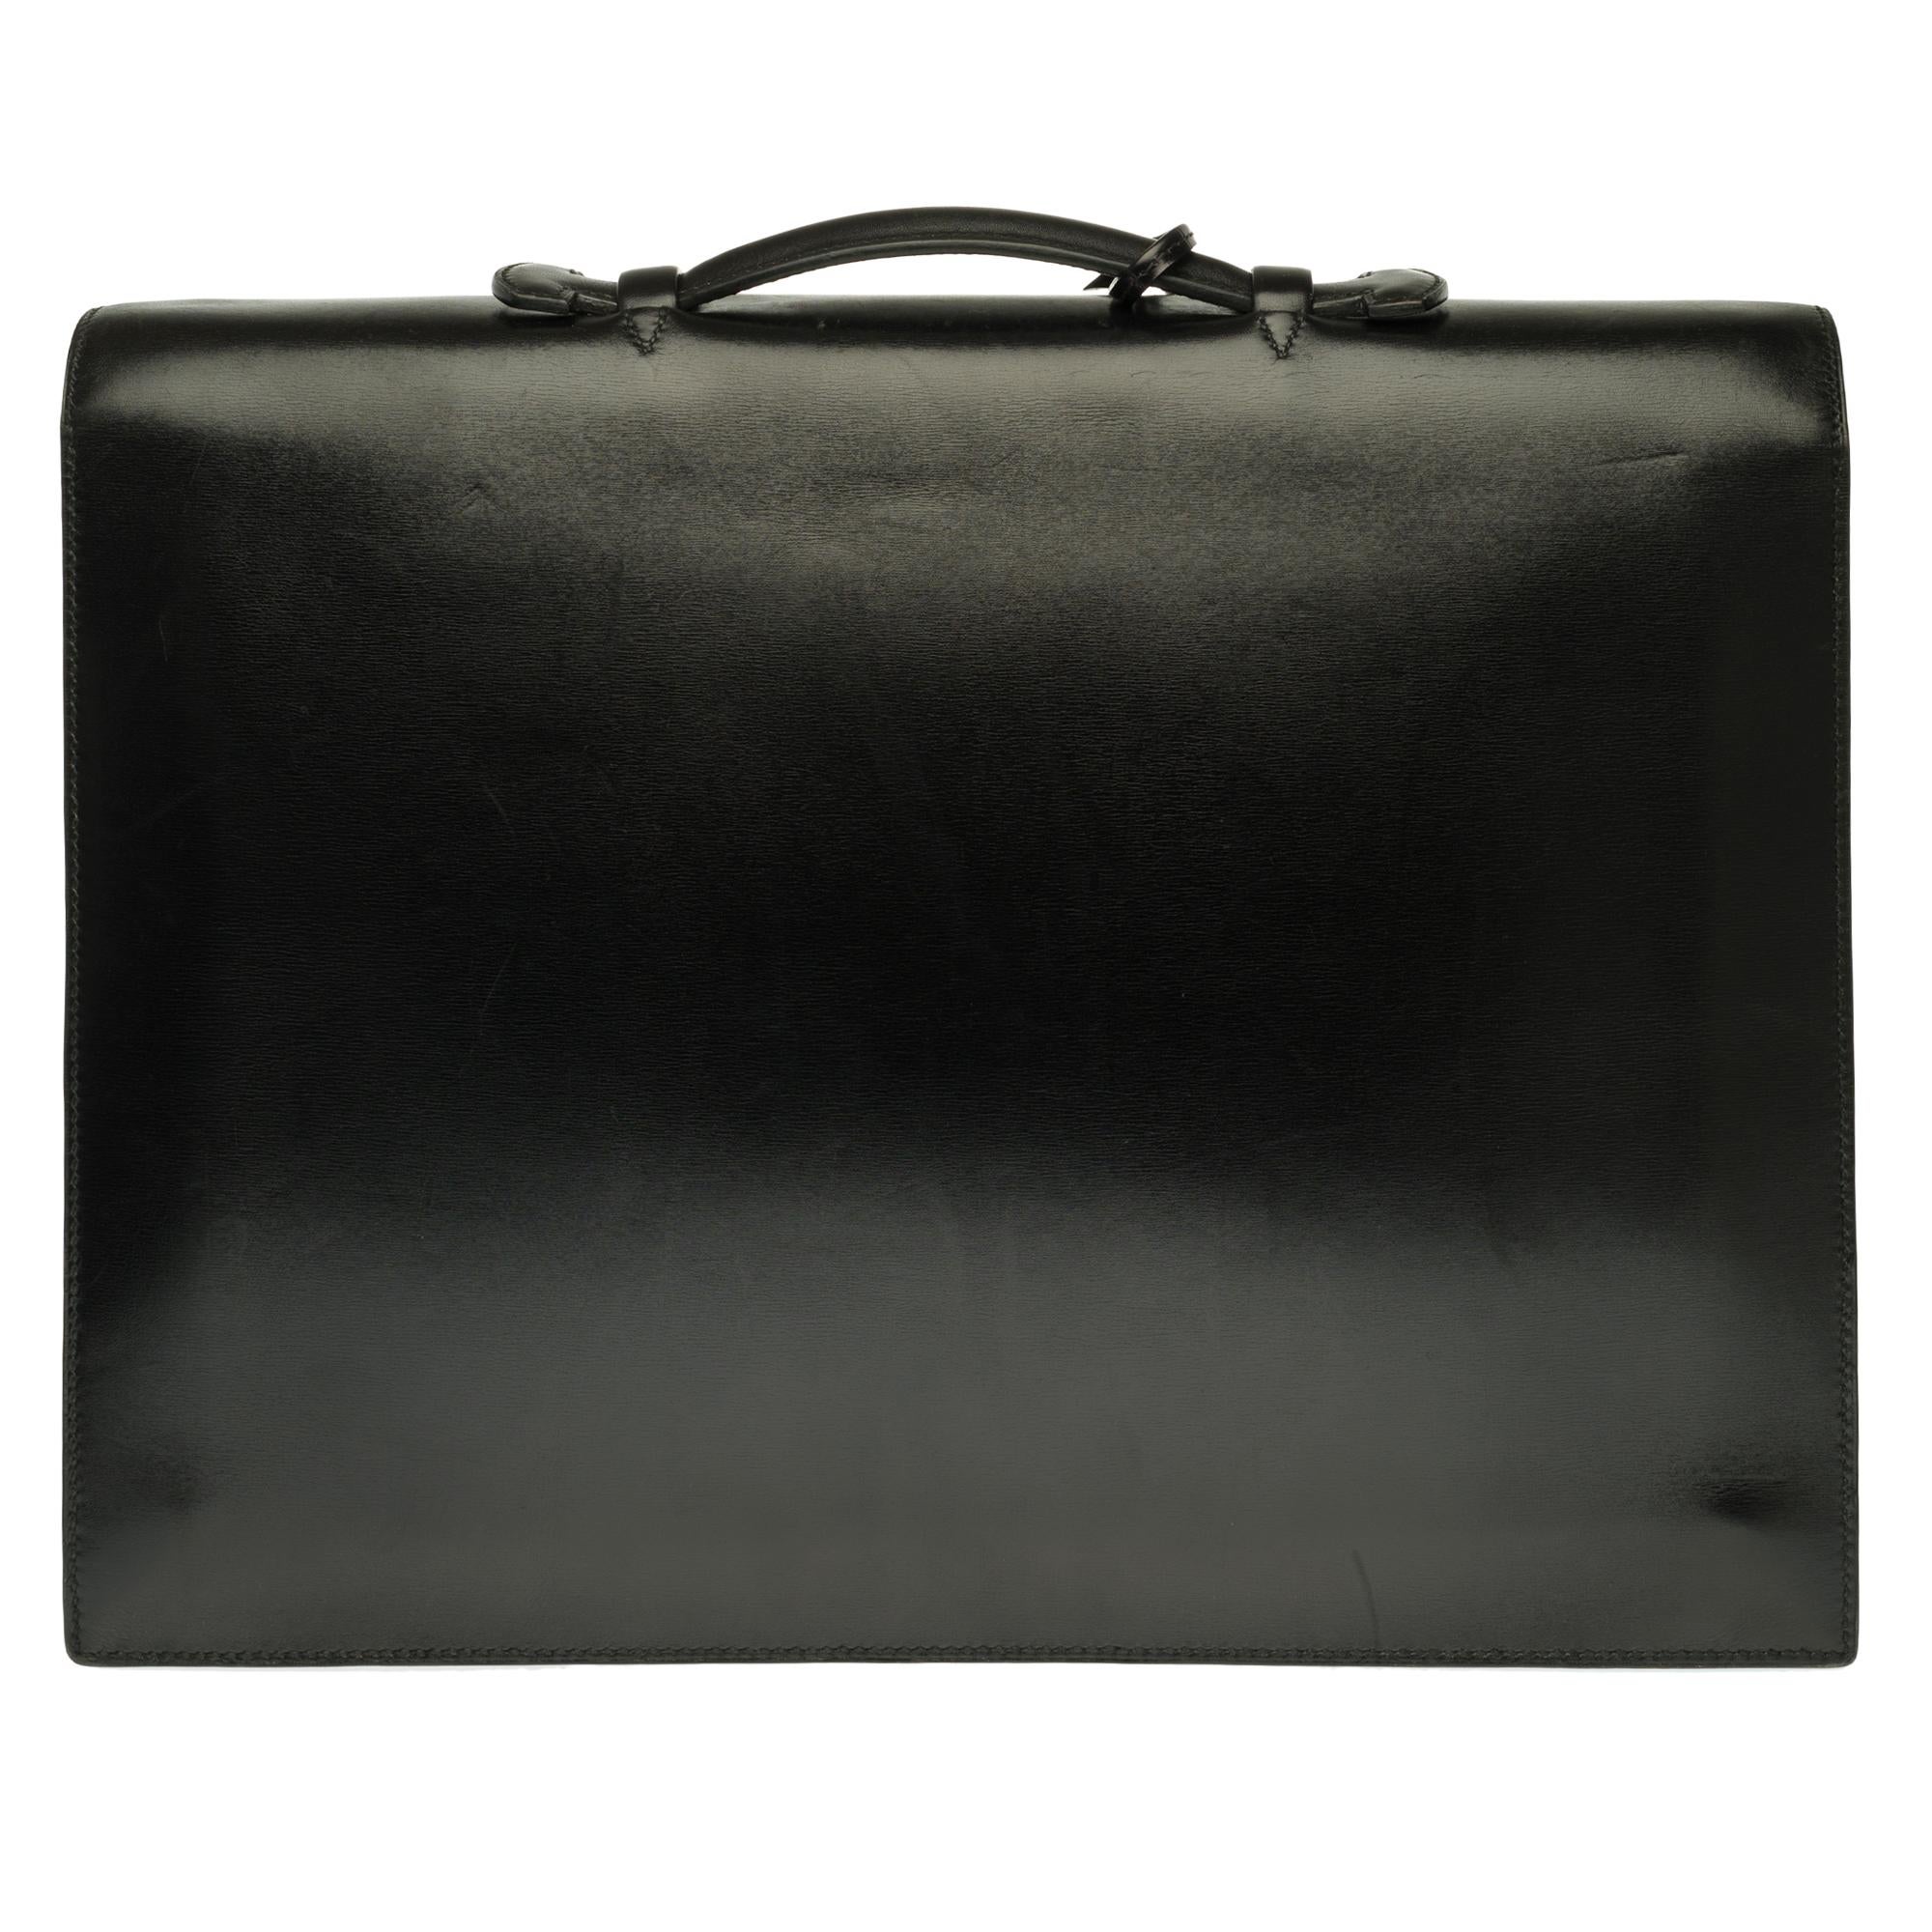 Very Classy Hermès Briefcase Messenger bag in black box calfskin leather customised with black Crocodile porosus (tirette and clochette), gold-tone metal hardware, simple black leather handle allowing a handheld.

Folding latch closure on flap,